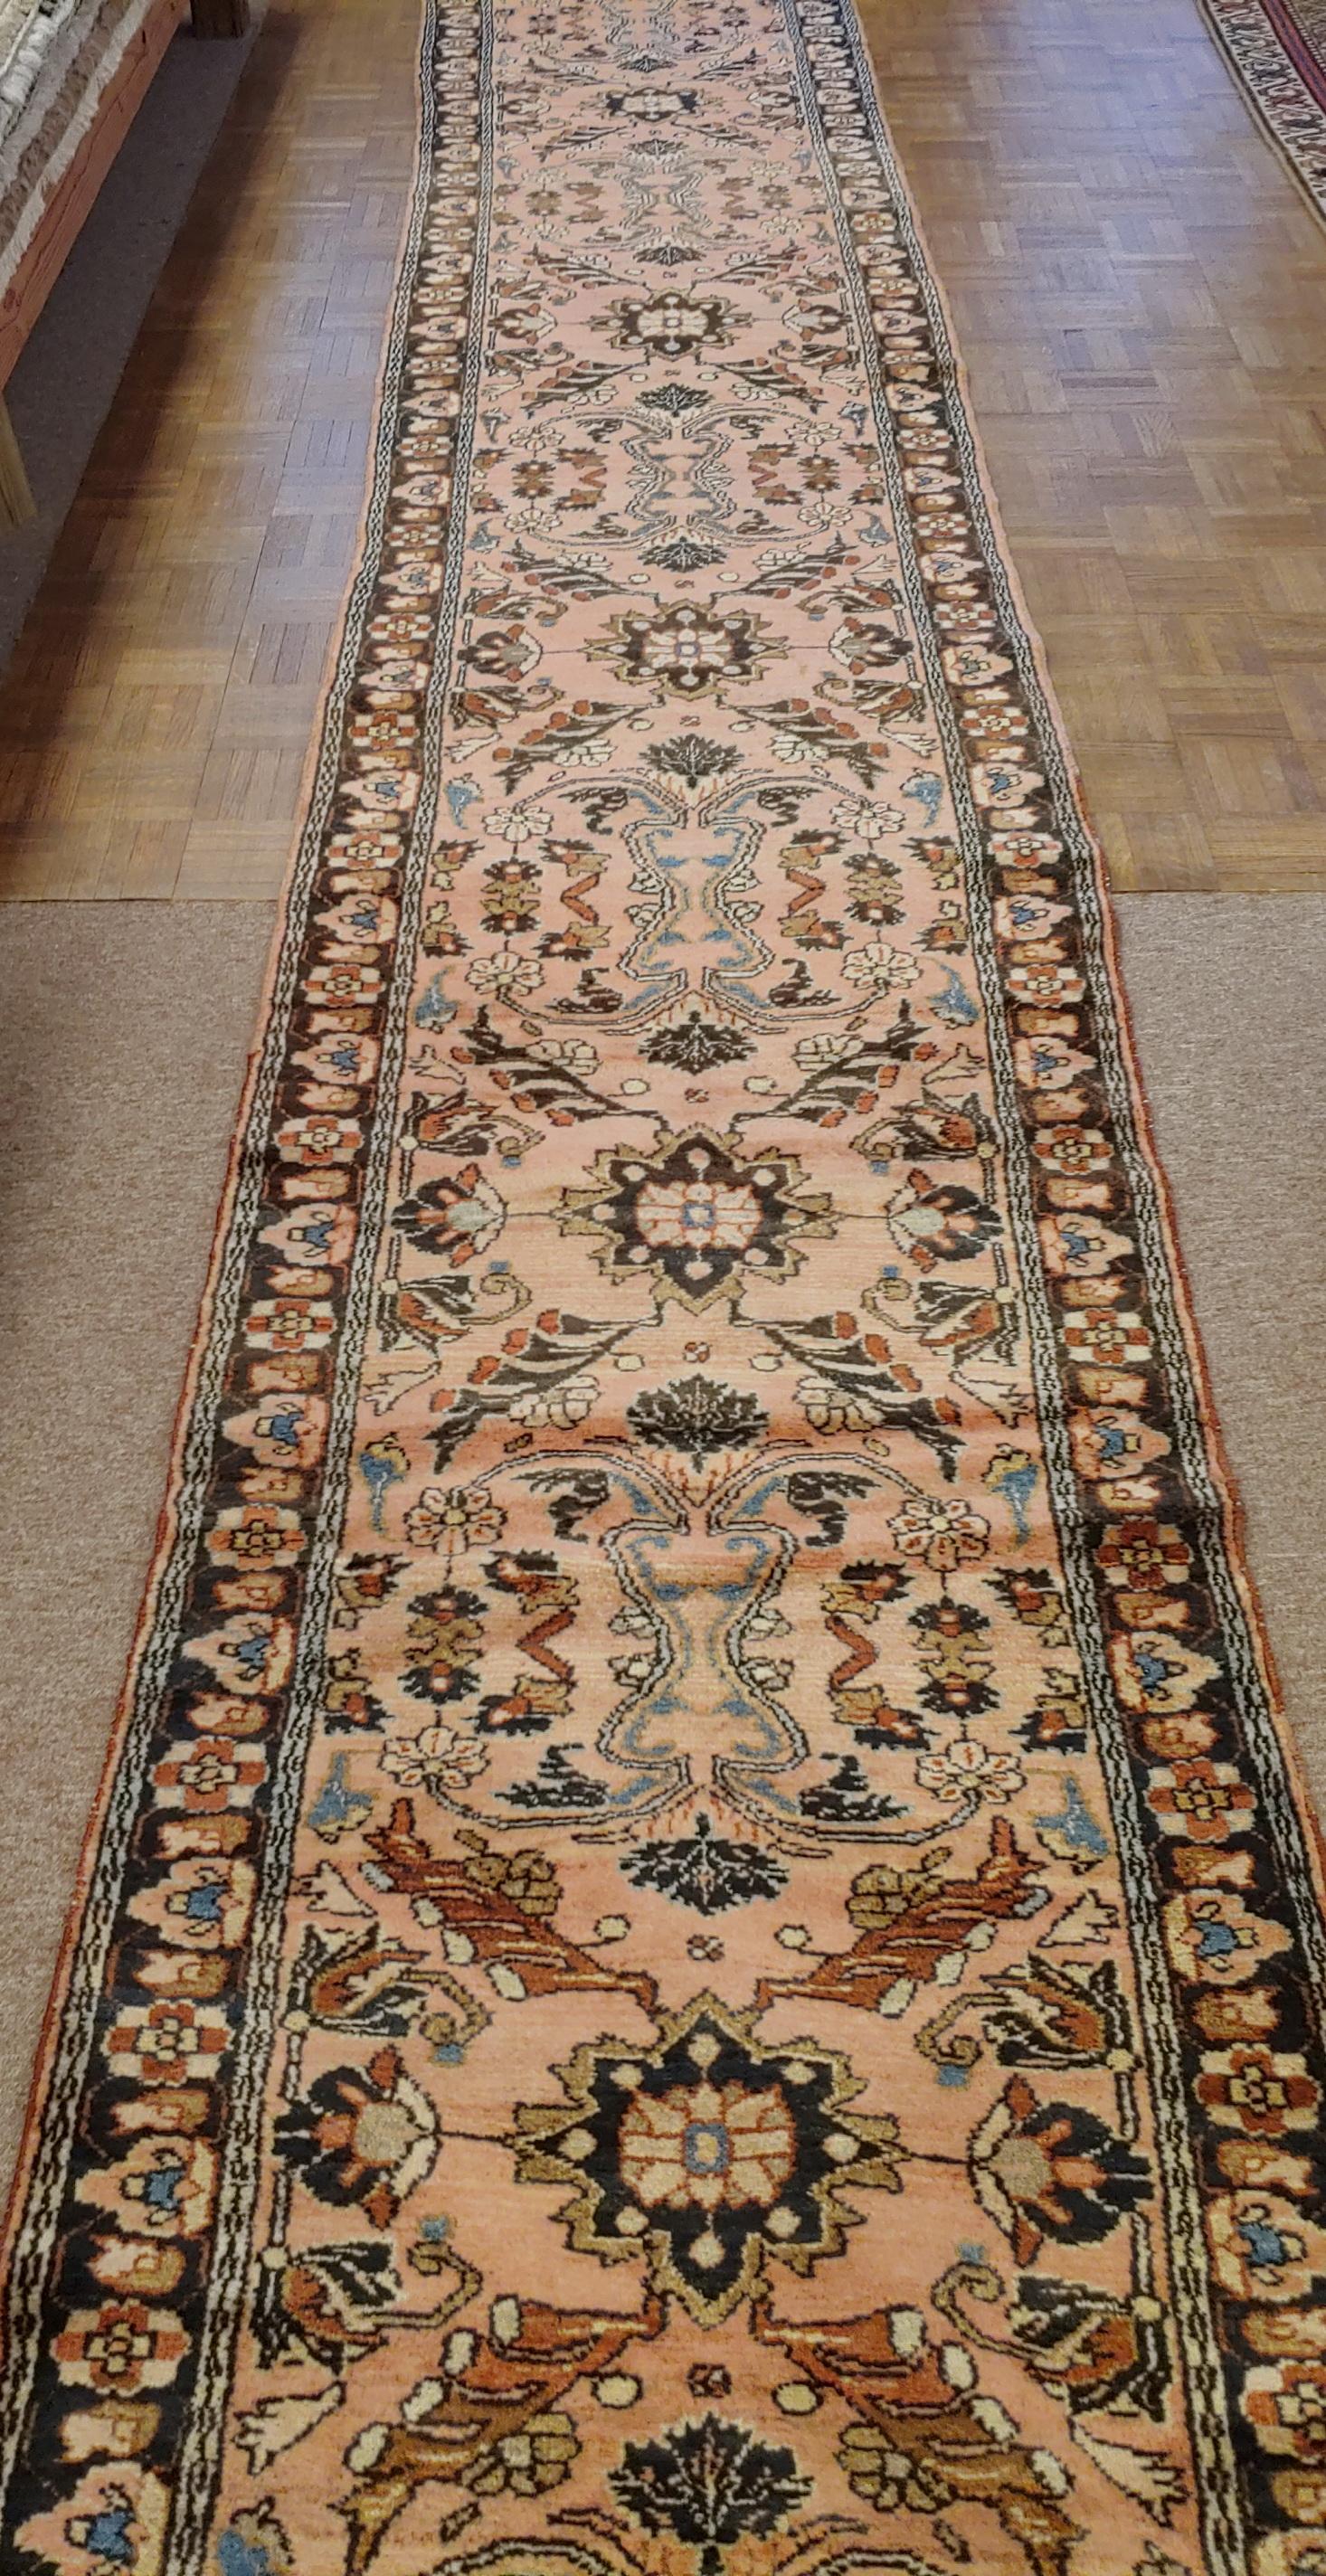 Antique Persian Lilyhan Rug, Rust/Mauve Colored Field, 1915 runner 2-5x16=4 In Good Condition For Sale In Williamsburg, VA